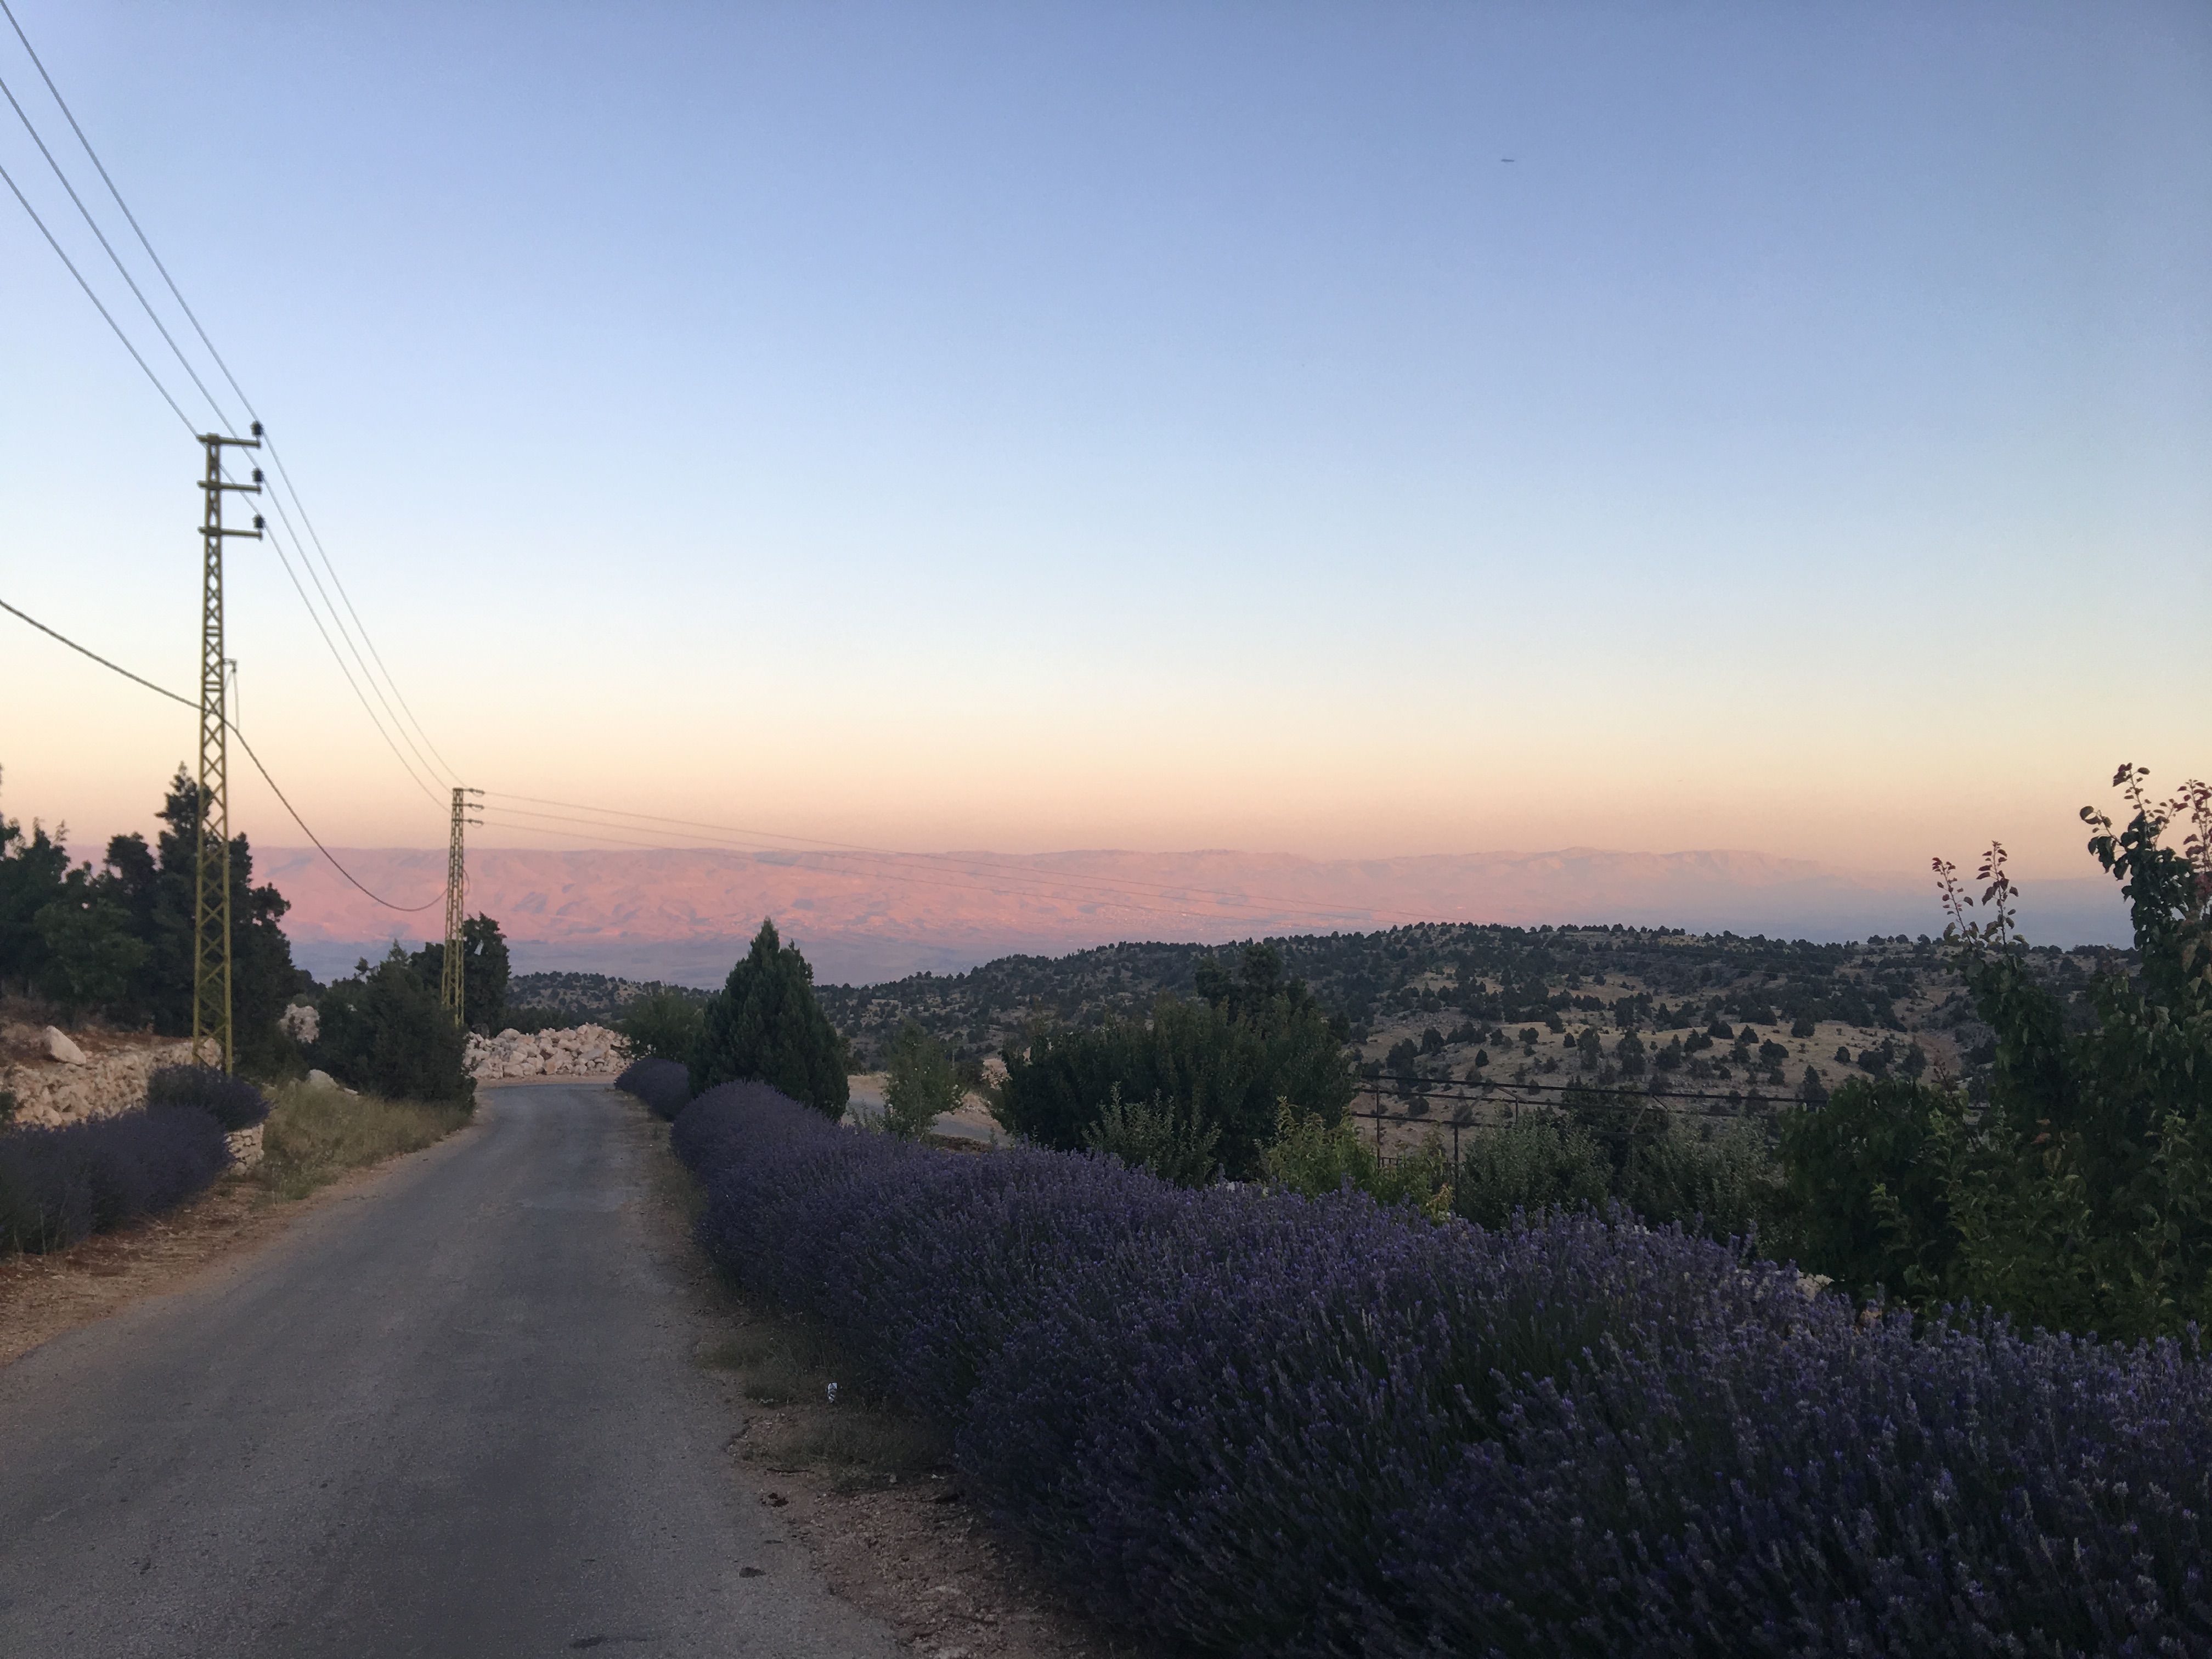 In Berqa, a village in the northern Bekaa Valley, juniper trees and lavender line the road. Image by Catherine Cartier. Lebanon, 2019.